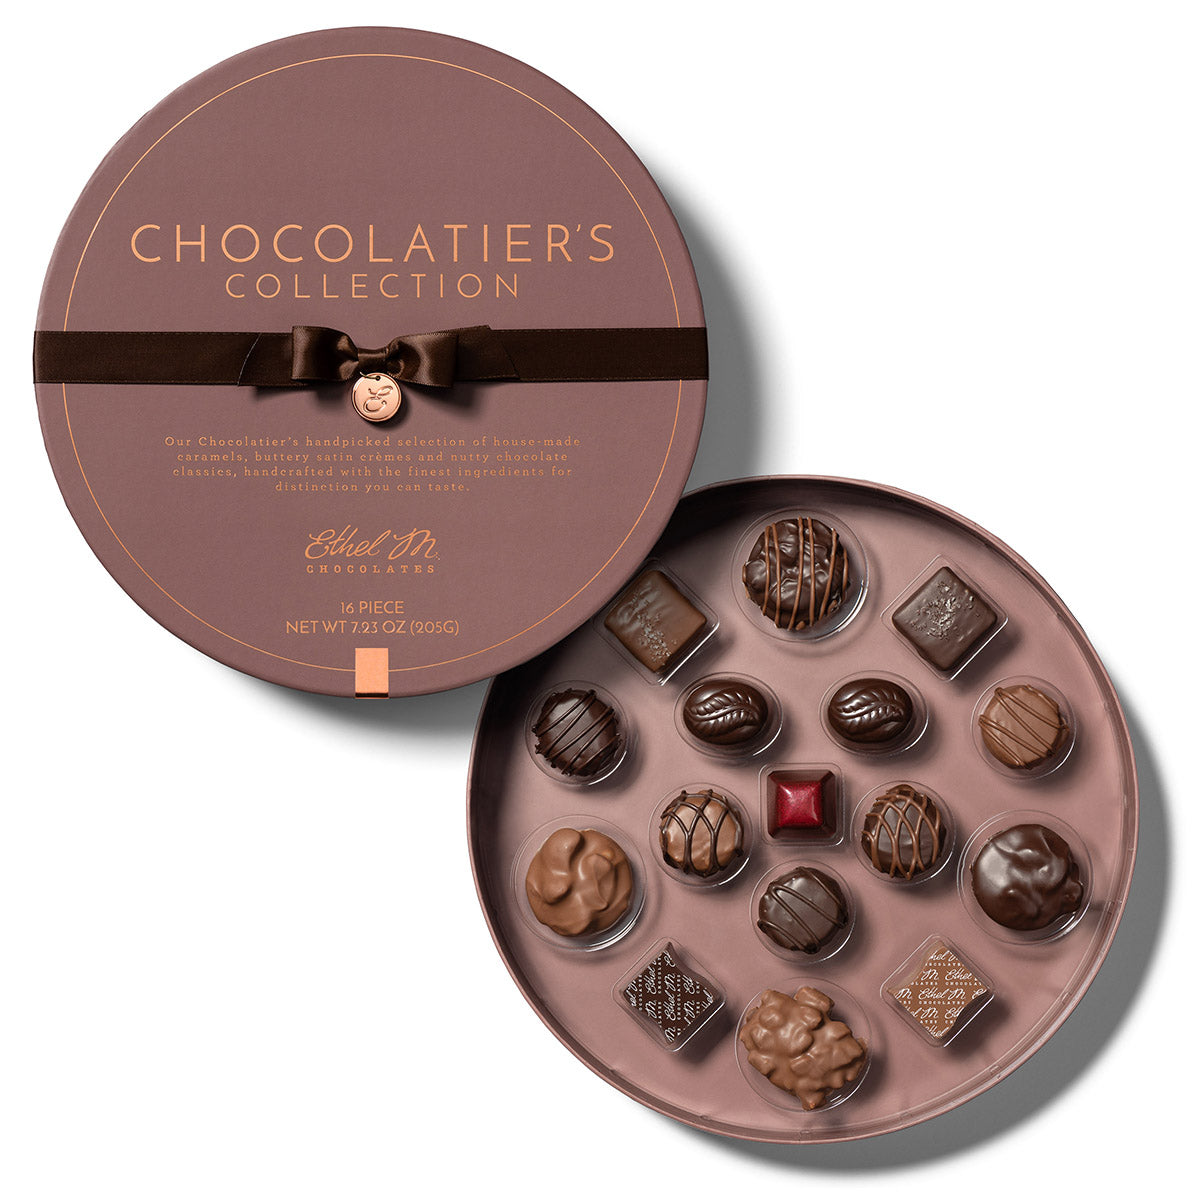 16 piece chocolatiers collection open with lid